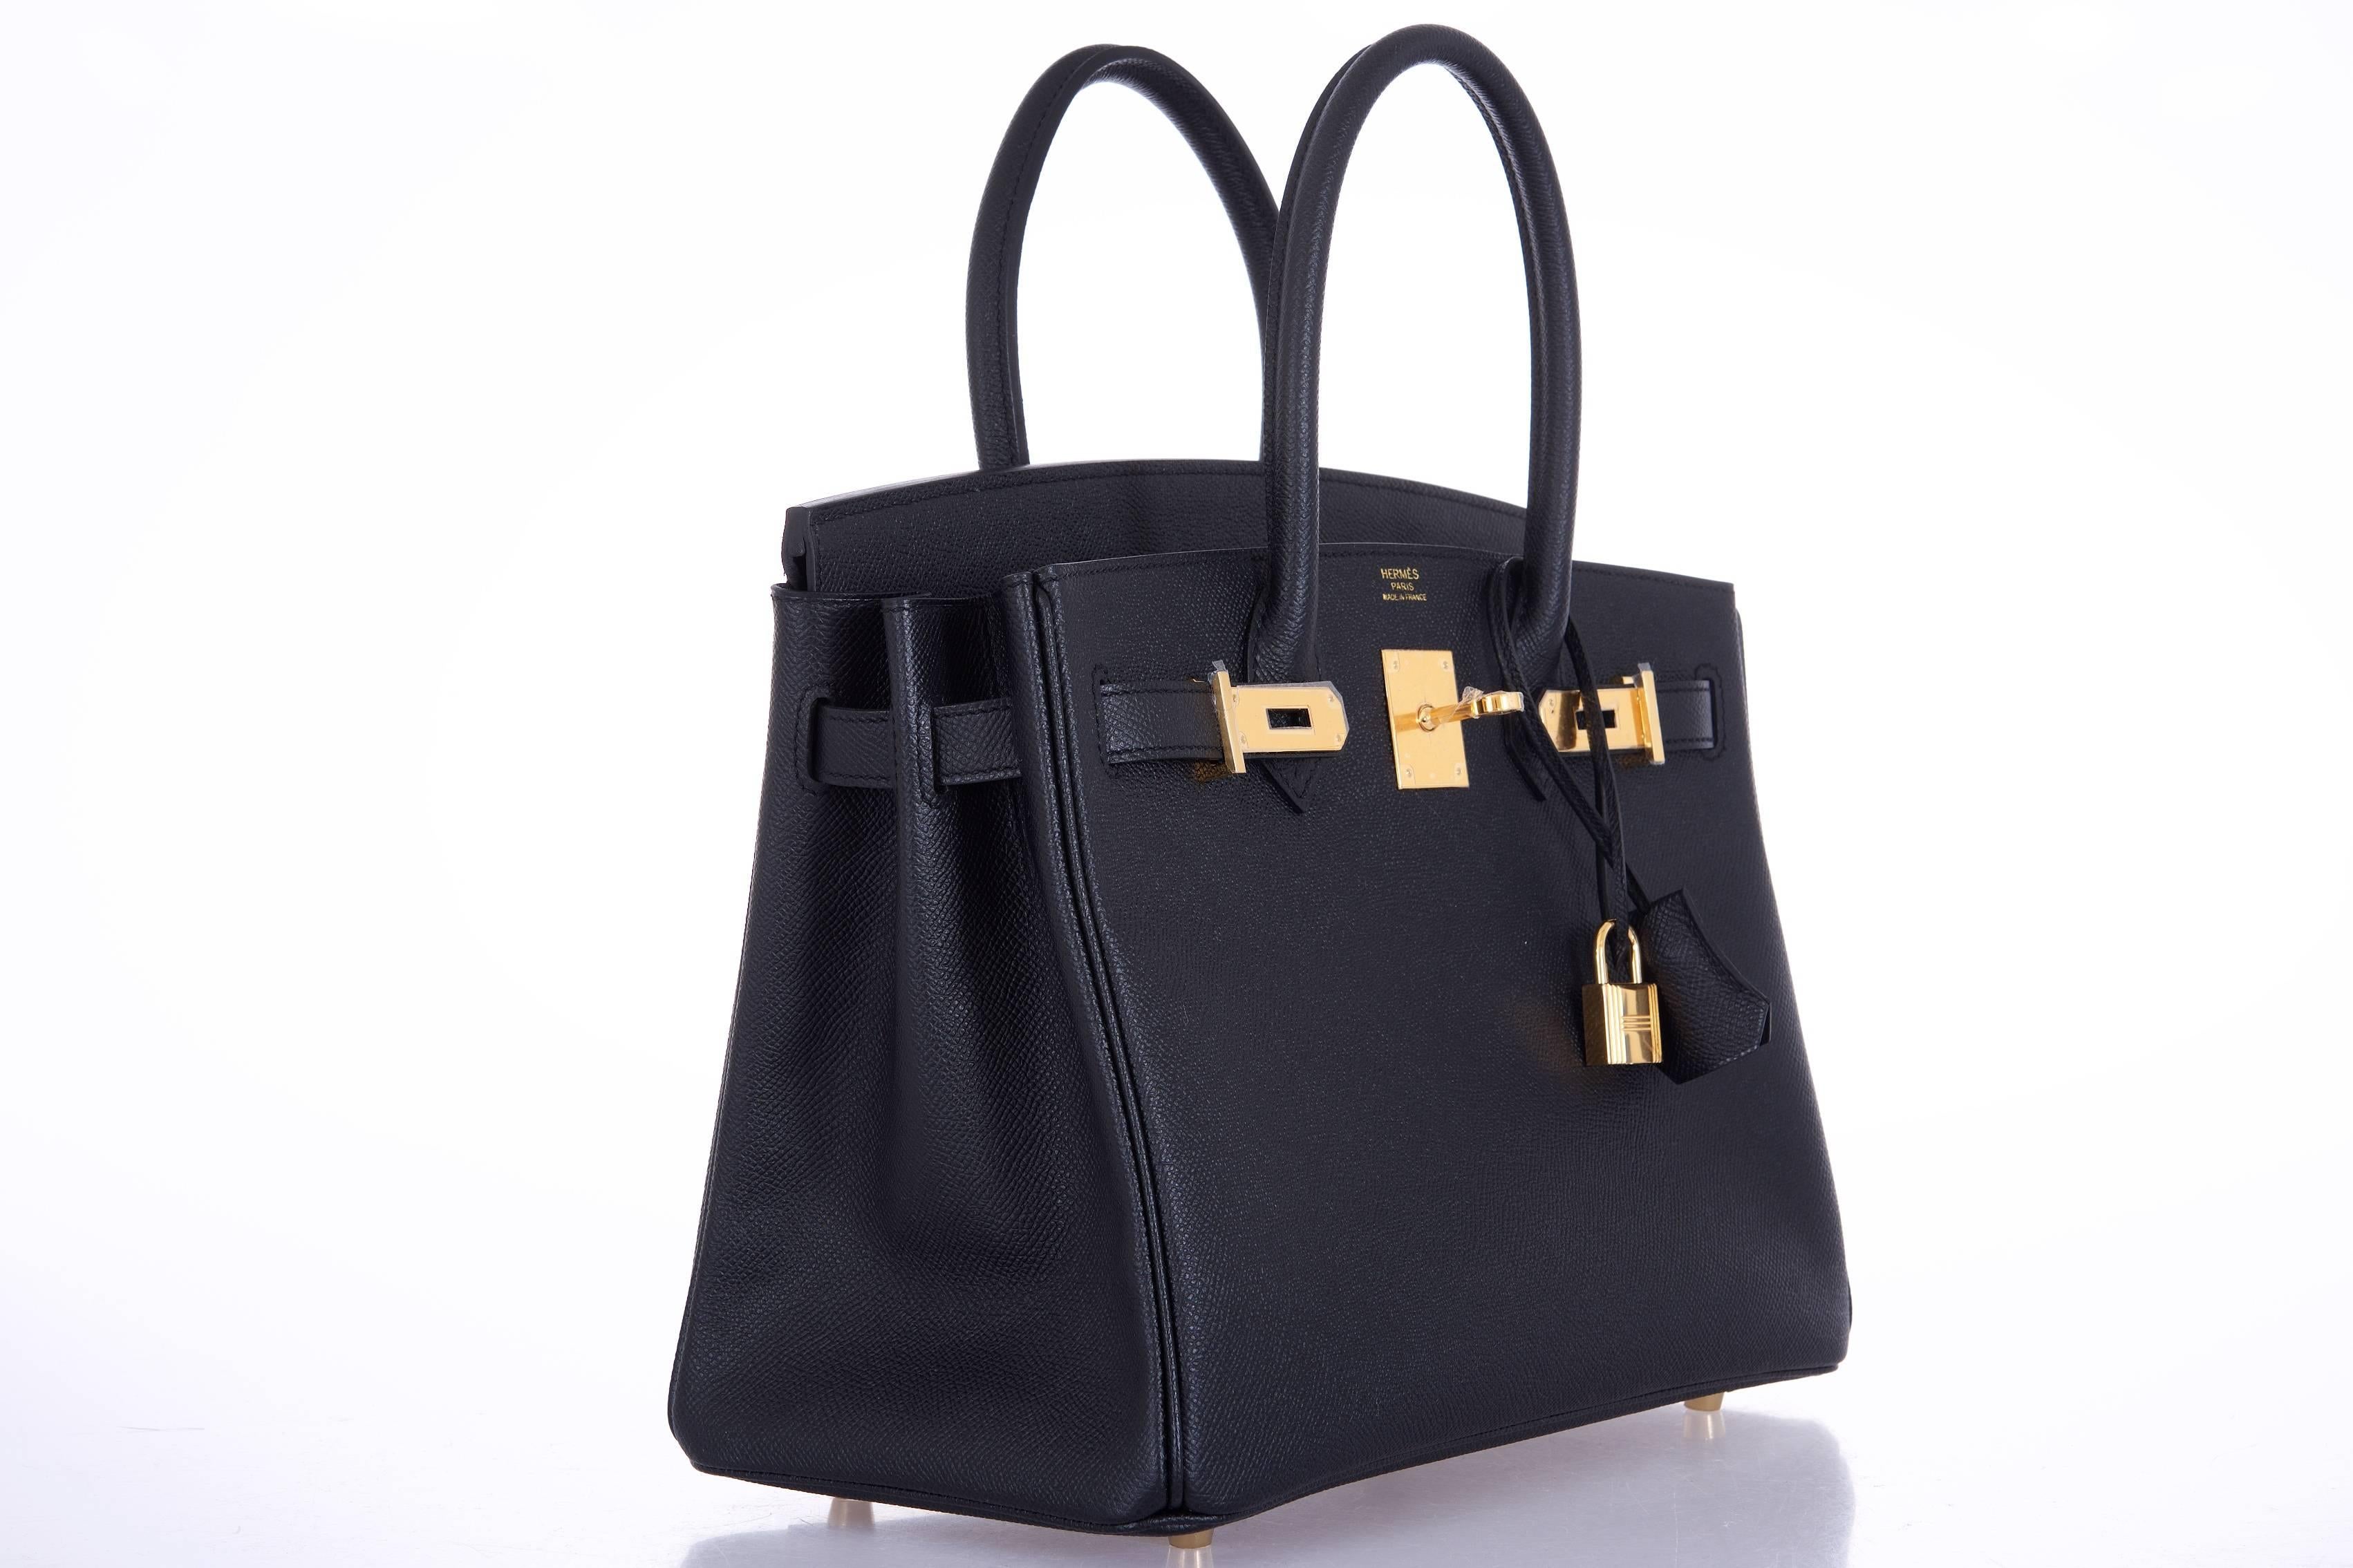 New Condition
Hermes 30cm Black Epsom birkin with Gold hardware!
 
12" Width x 8" Height x 6” Depth
Hermes Birkin 30cm with a 30cm bagnizer included!

Black 30cm with gold in epsom leather is a super rare find. This combination is timeless